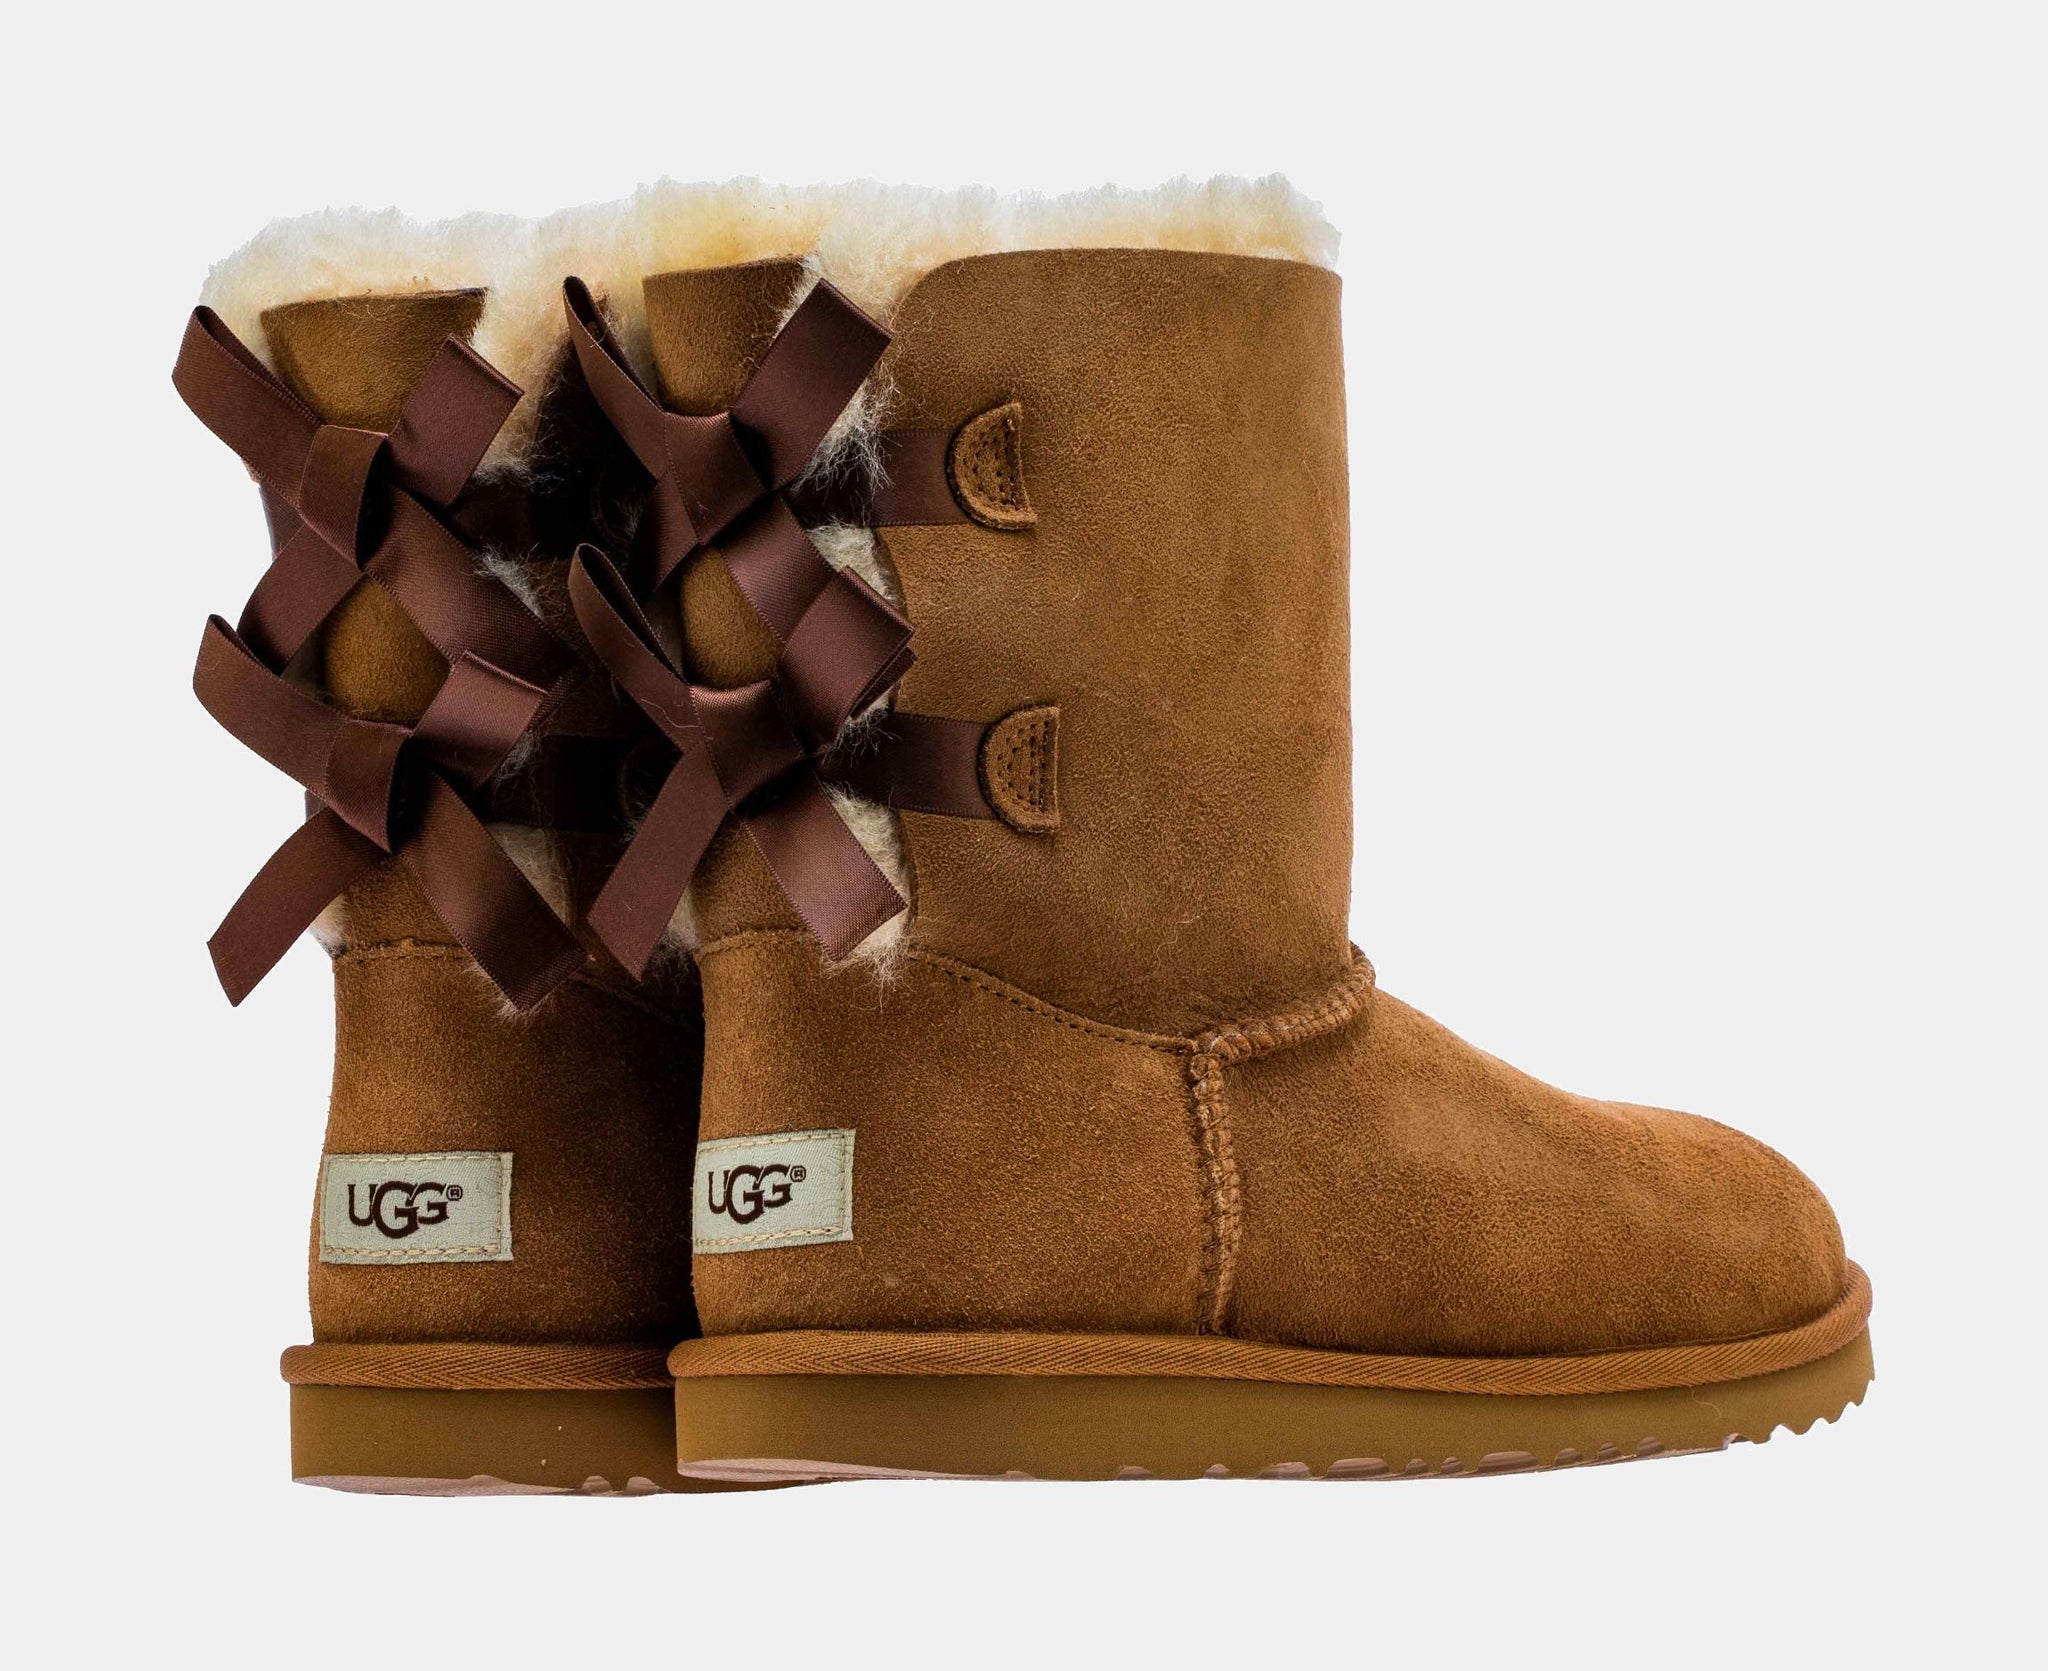 https://www.shoepalace.com/cdn/shop/products/eeff739fa6d6488186d1aa21ddfa2014_2048x2048.jpg?v=1650919903&title=ugg-1017394k-che-classic-bailey-bow-2-grade-school-boot-chestnut-brown